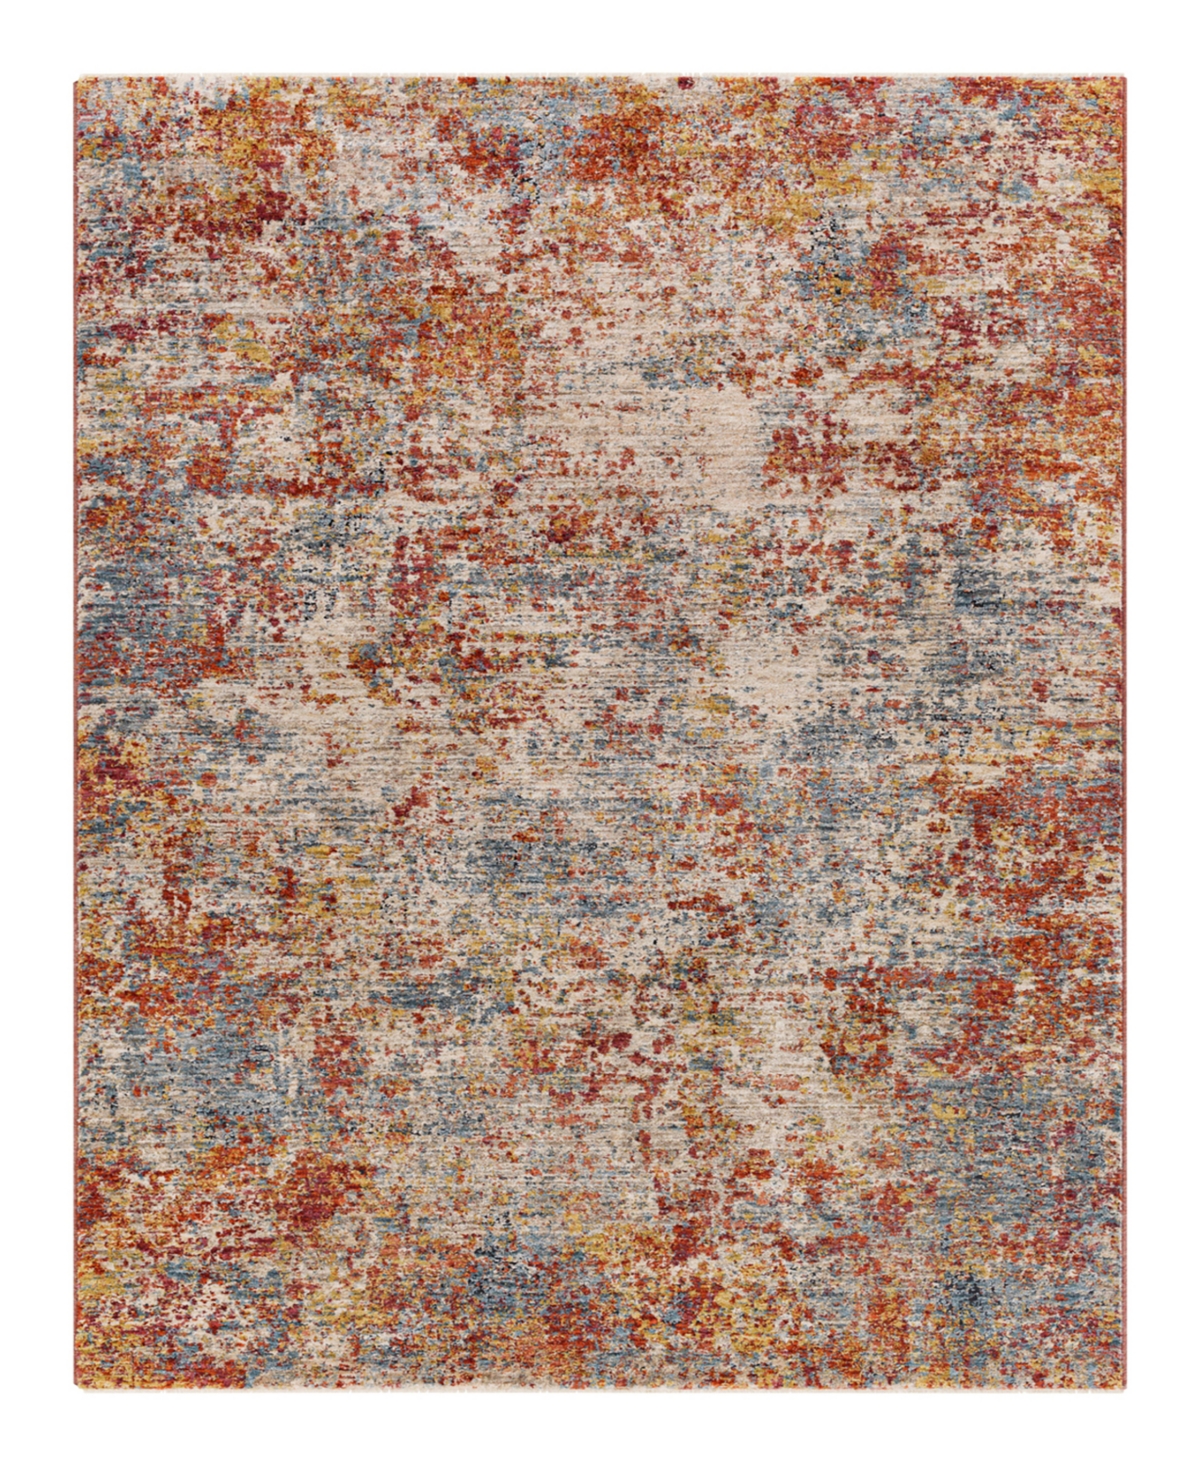 Surya Mirabel Mbe-2300 5' x 7'5in Area Rug - Coral, Red